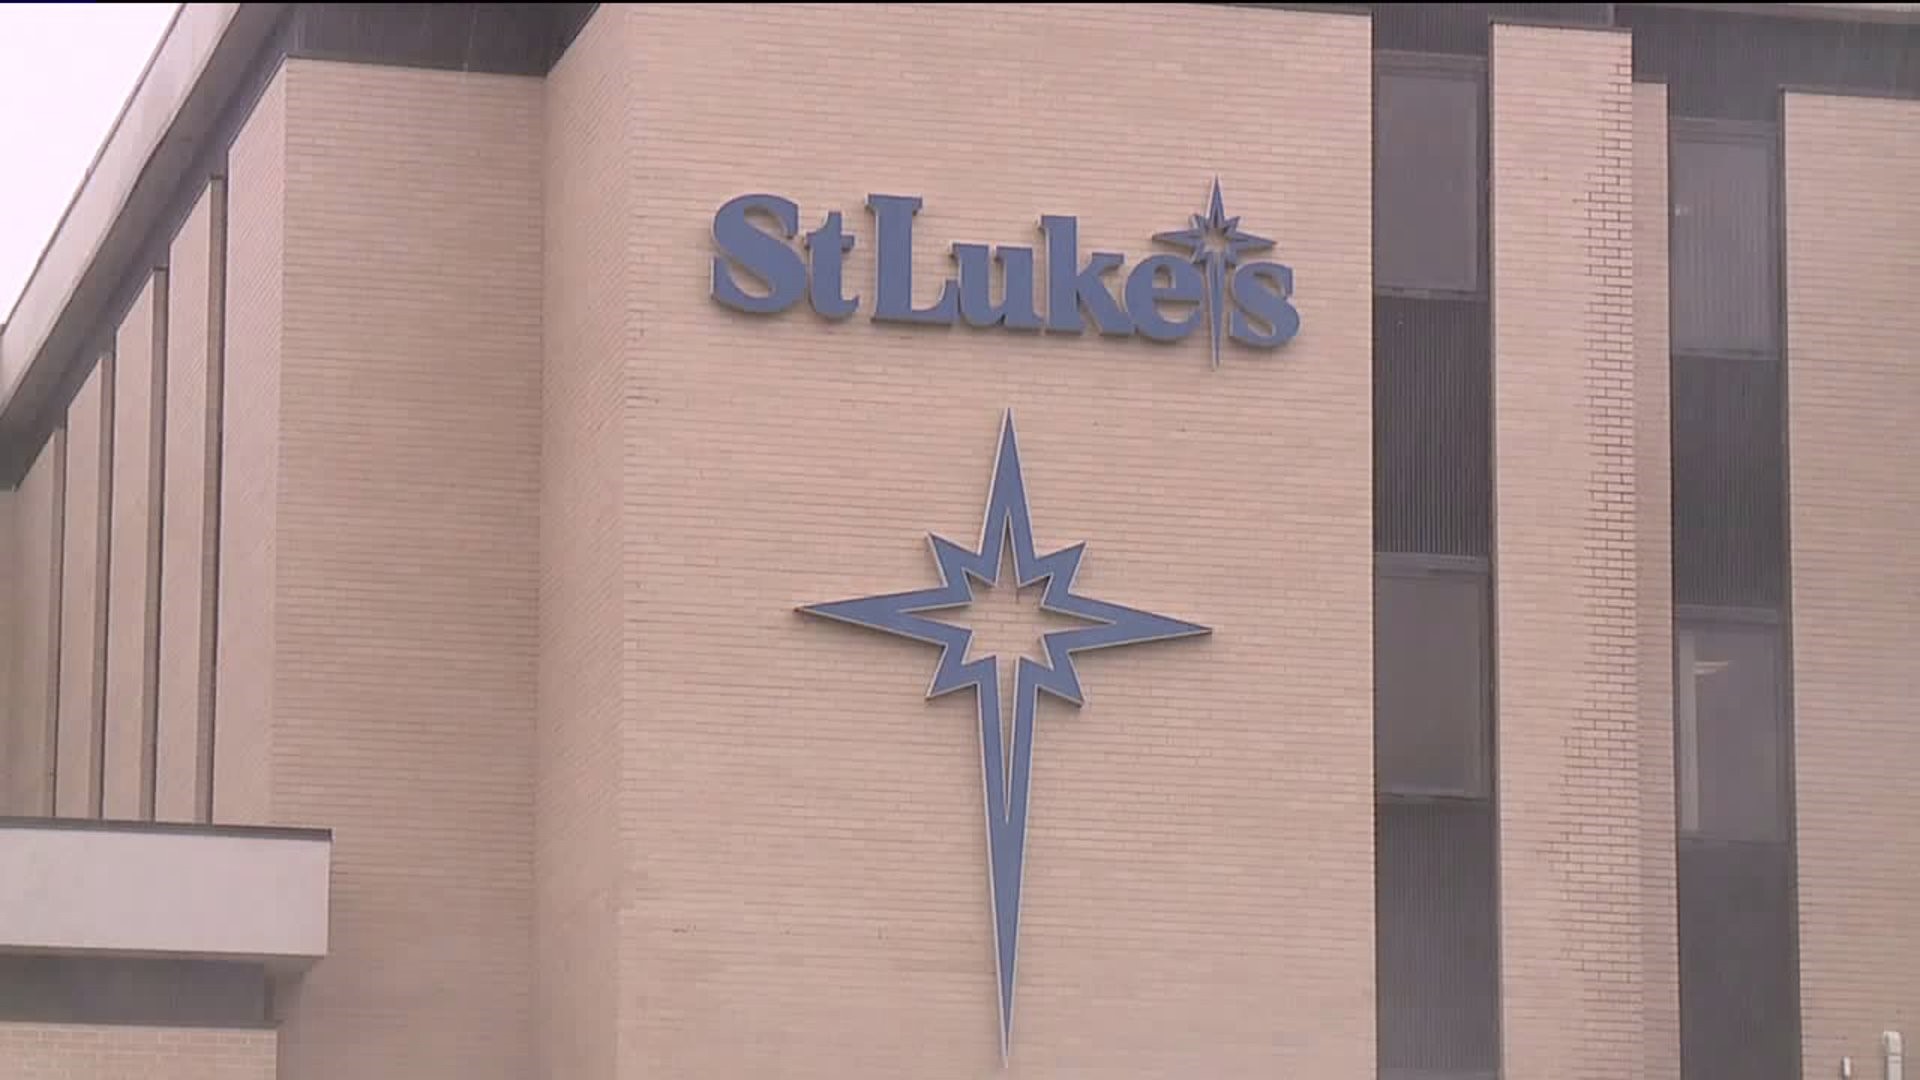 St. Luke's Proposes New Hospital in Carbon County